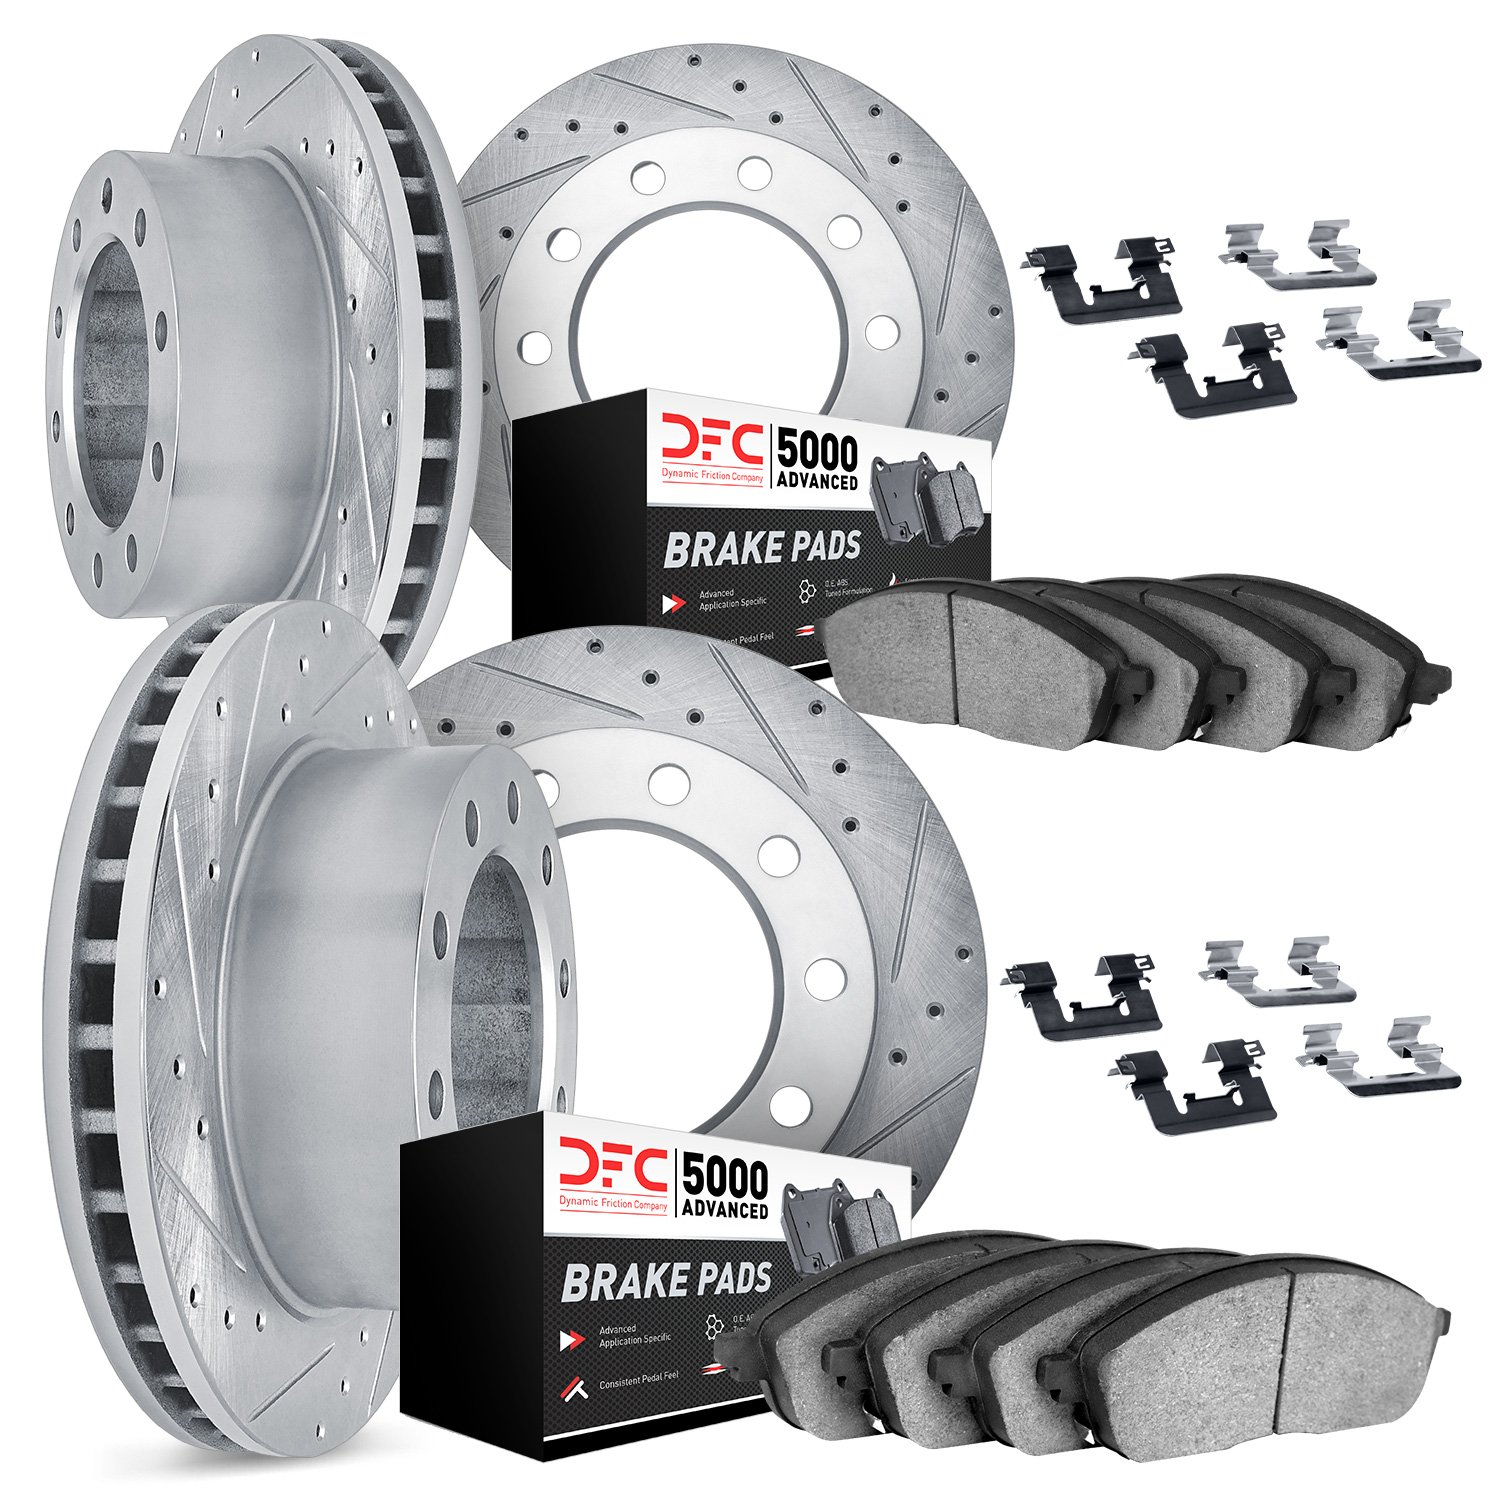 7514-54398 Drilled/Slotted Brake Rotors w/5000 Advanced Brake Pads Kit & Hardware [Silver], Fits Select Ford/Lincoln/Mercury/Maz